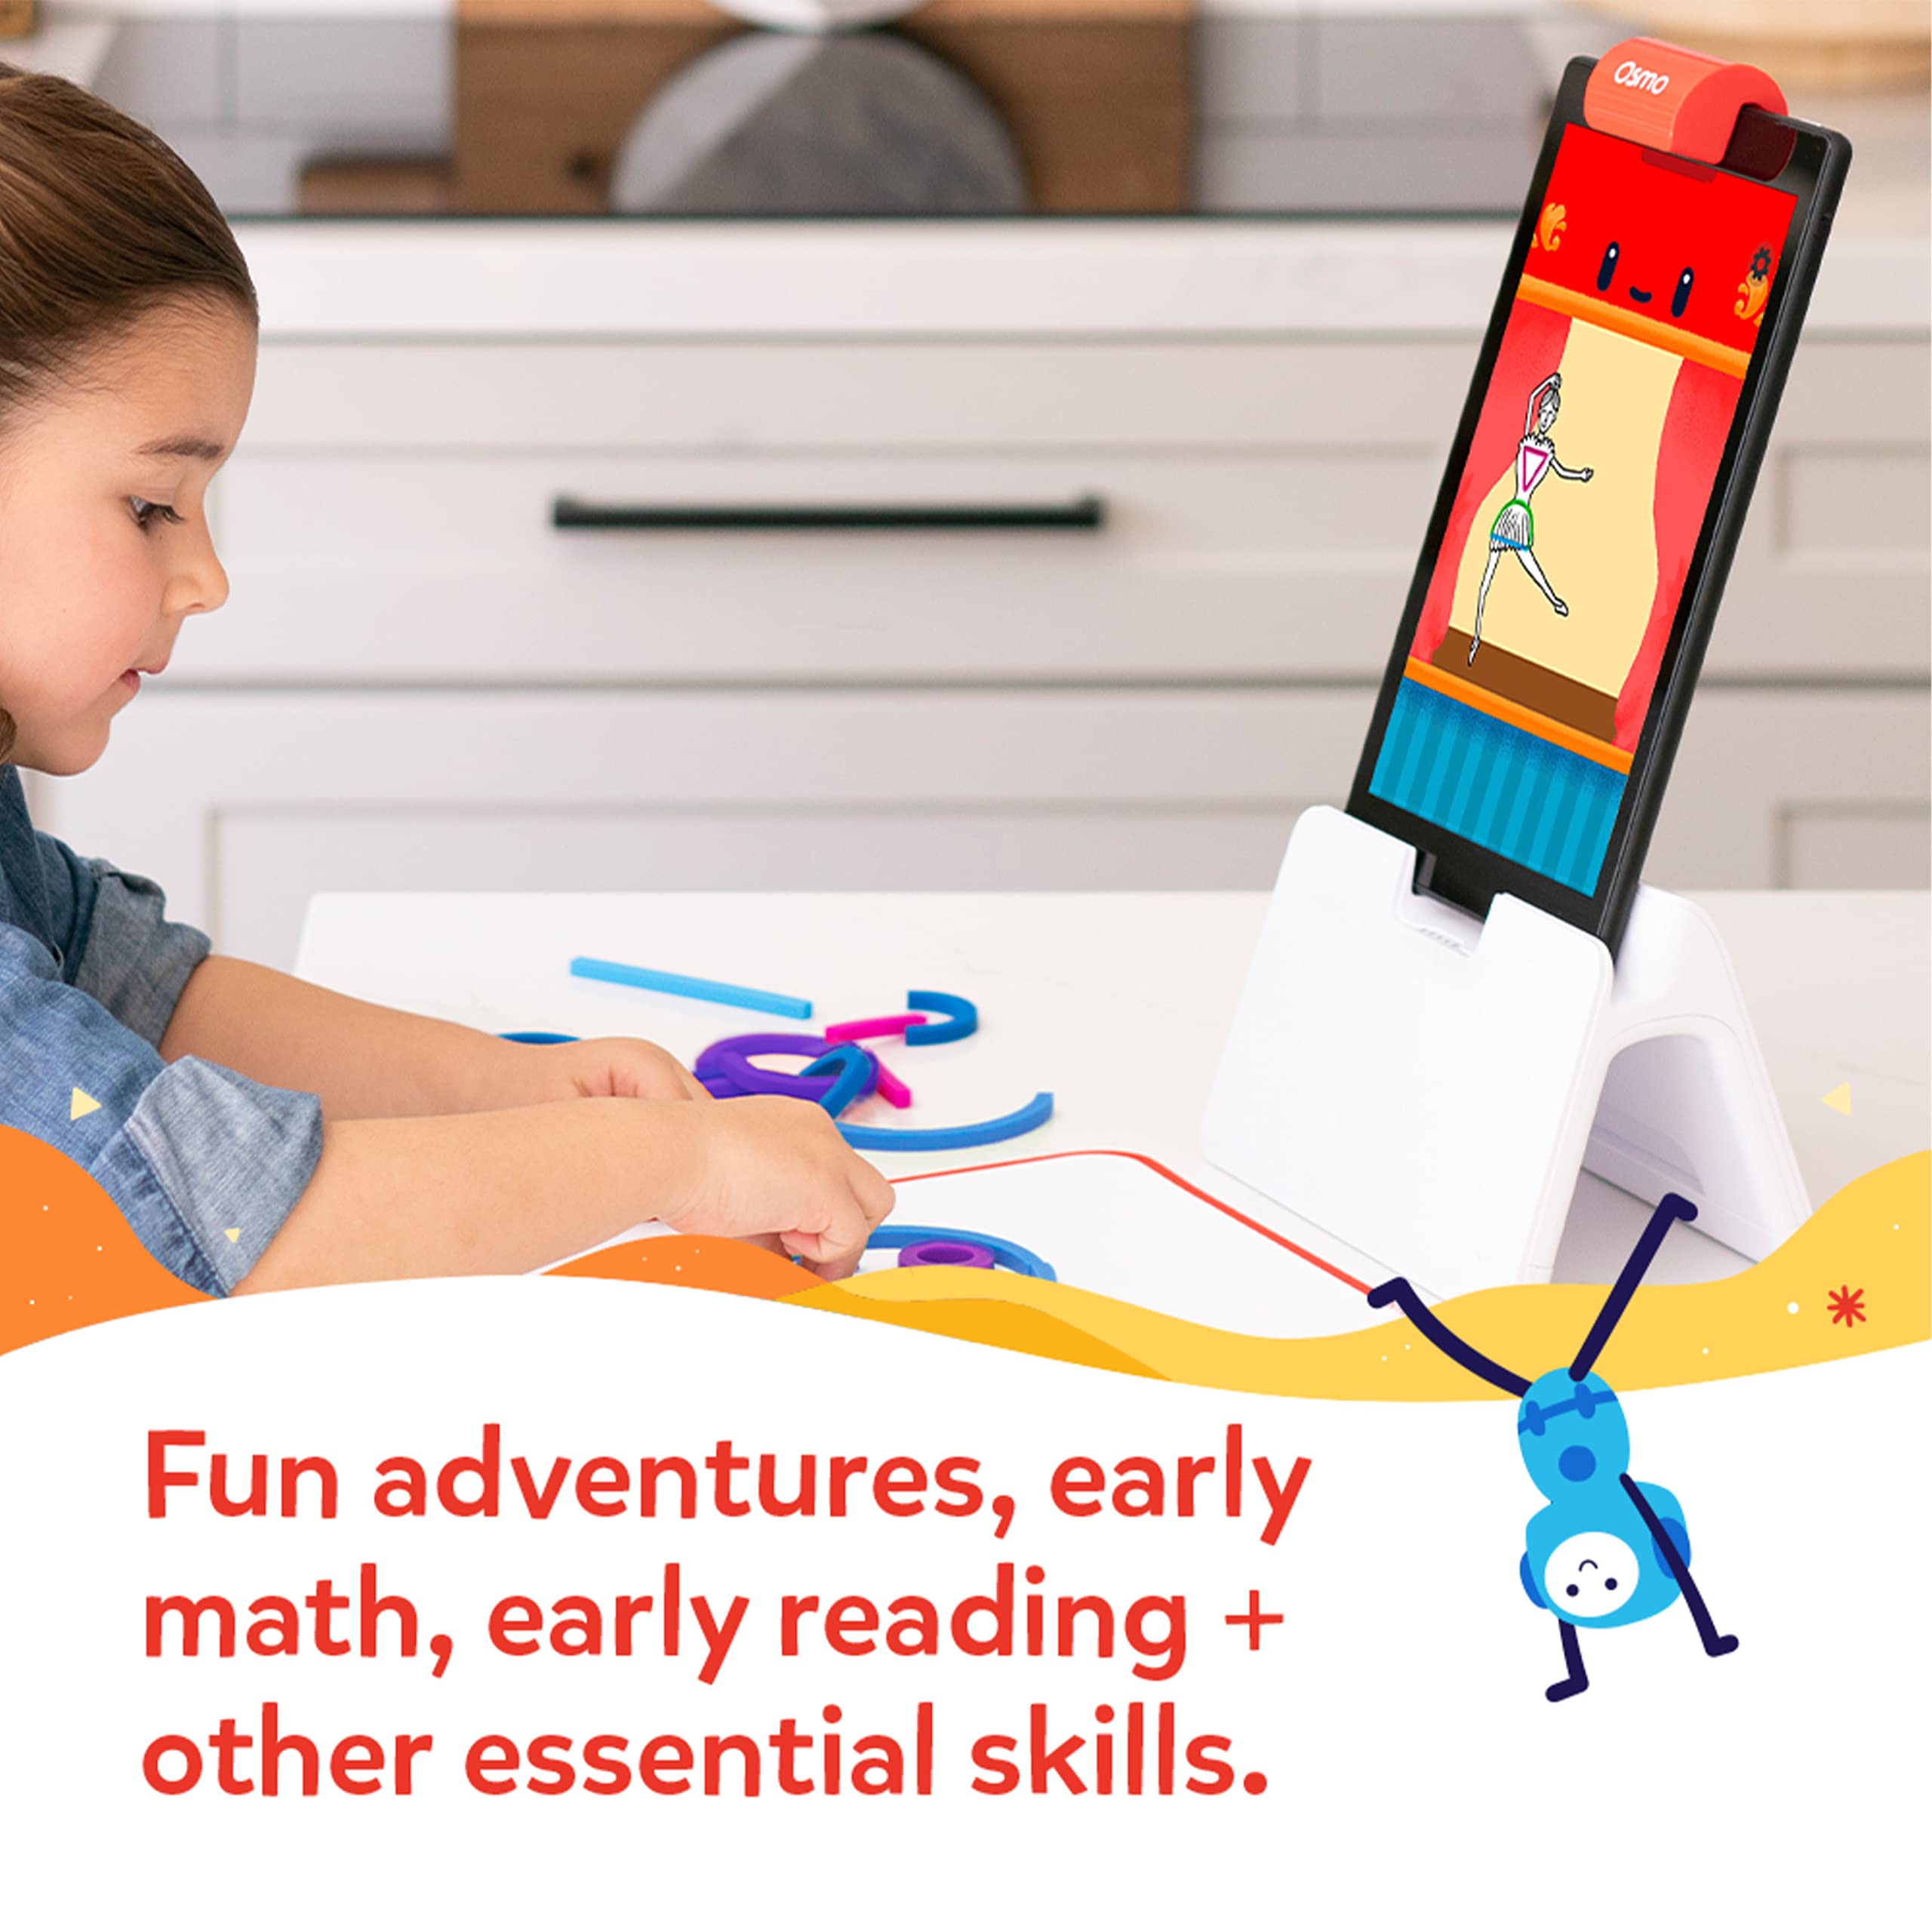 Osmo - Little Genius Starter Kit for Fire Tablet + Early Math Adventure - Valentine Toy - 6 Educational Games-Counting, Shapes & Phonics-STEM Gifts-Ages 3 4 5(Tablet Base Included)